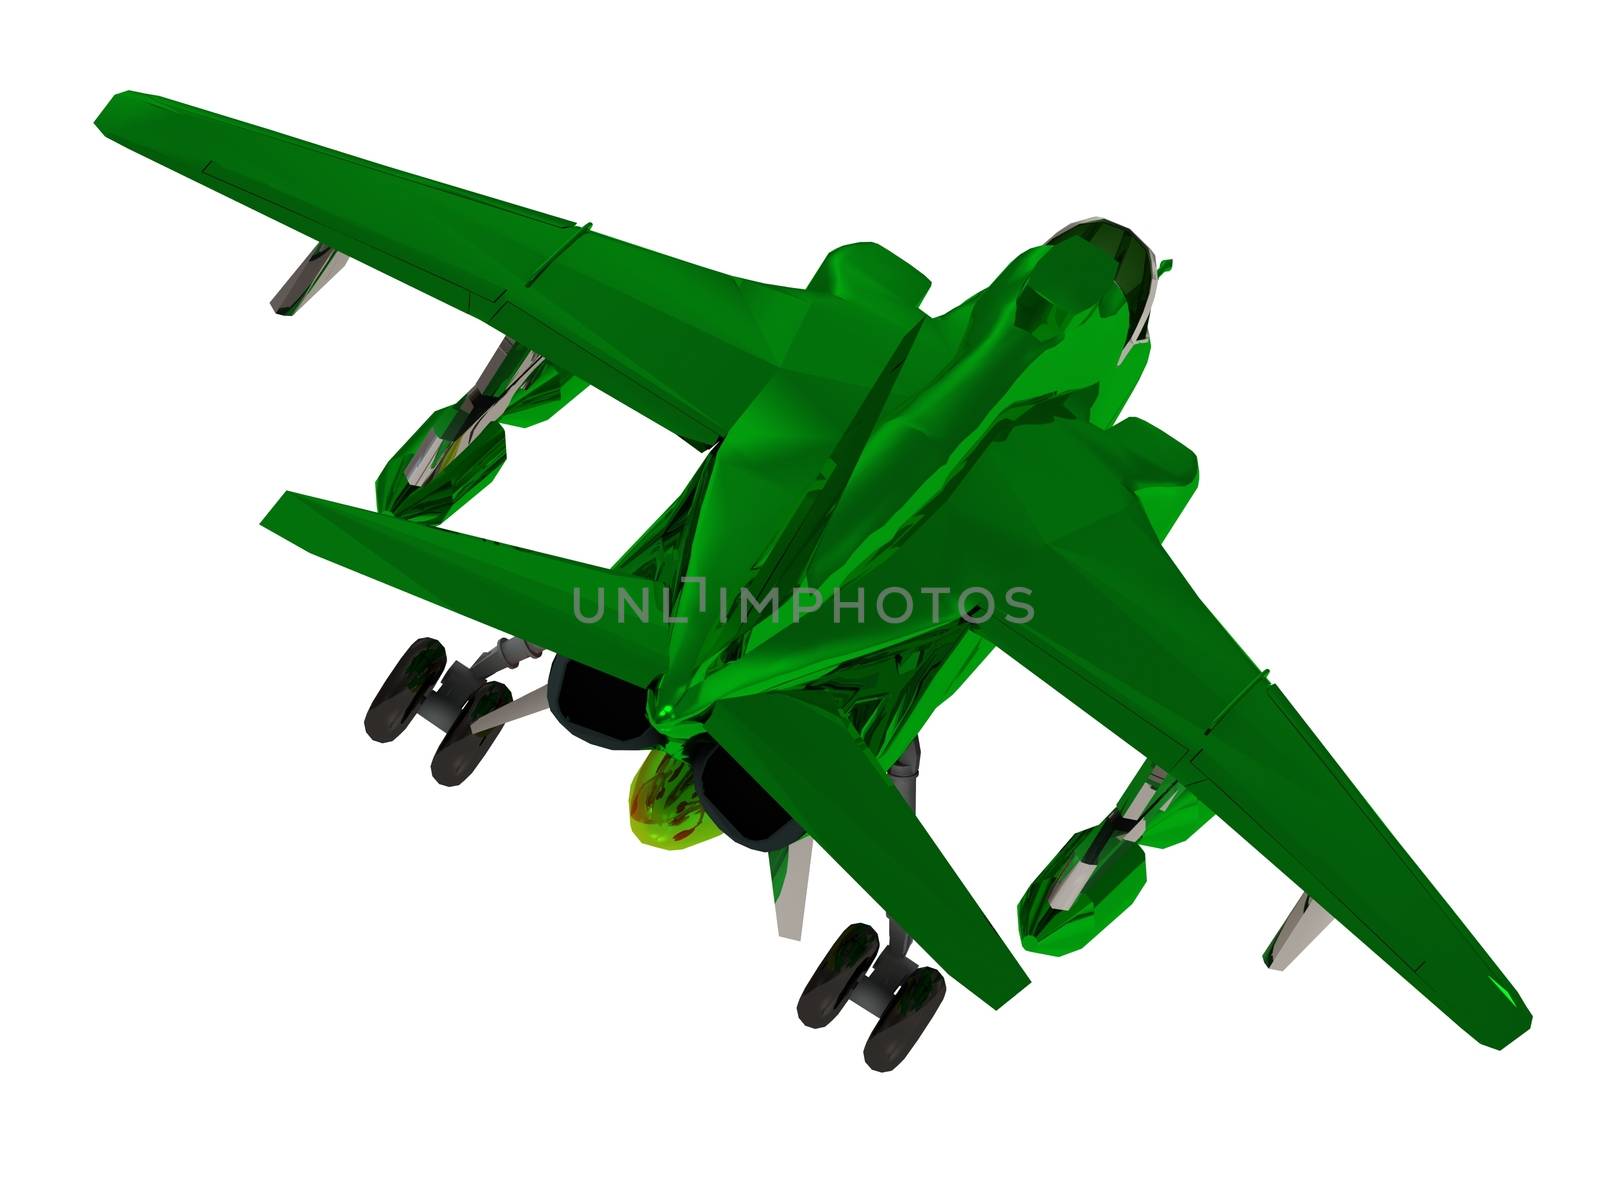 Military jet airplane with bomb during airshow on white background